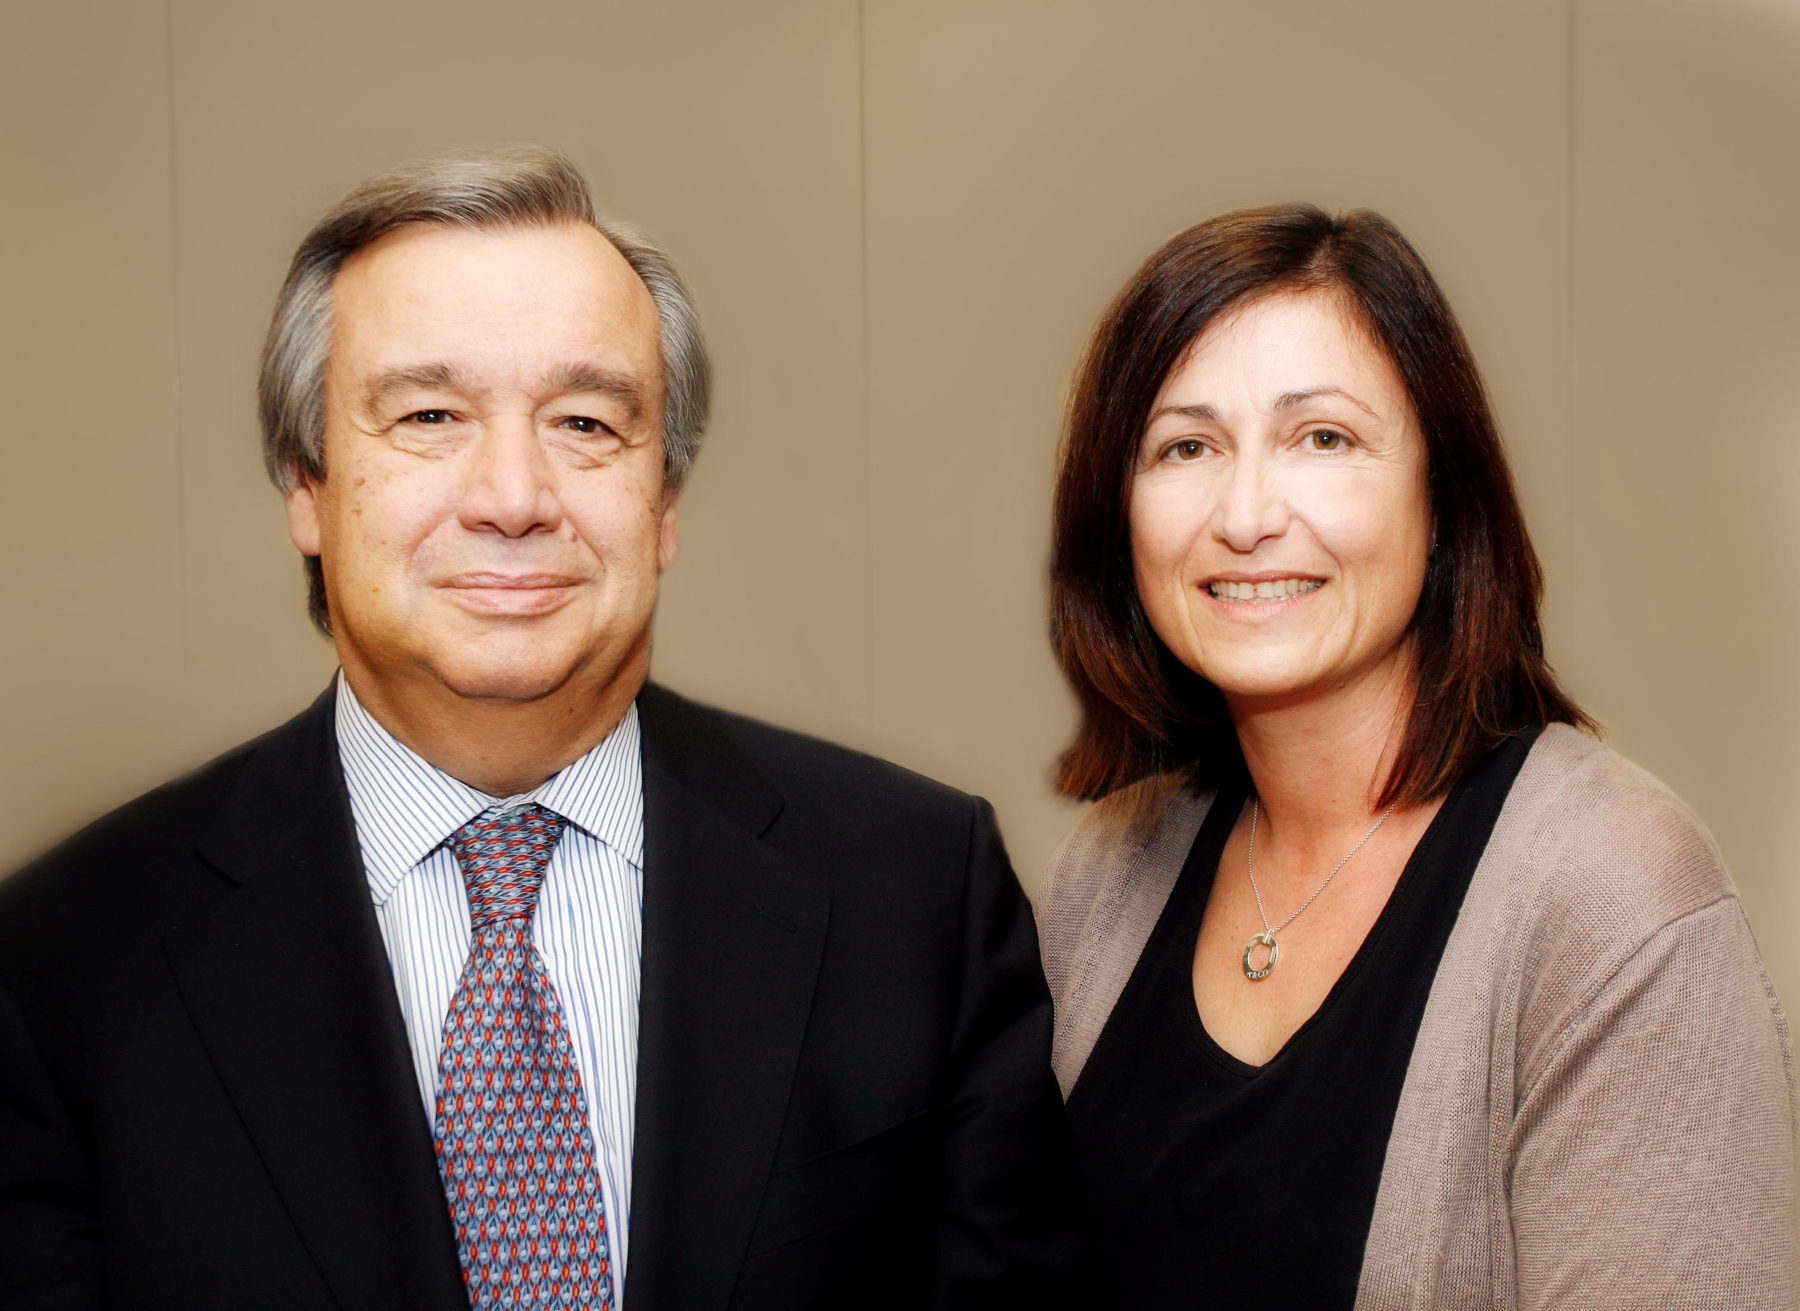 Carmel Guerra with the United Nations’ High Commissioner for Refugees, António Guterres.  Photographer: Shane Bell.